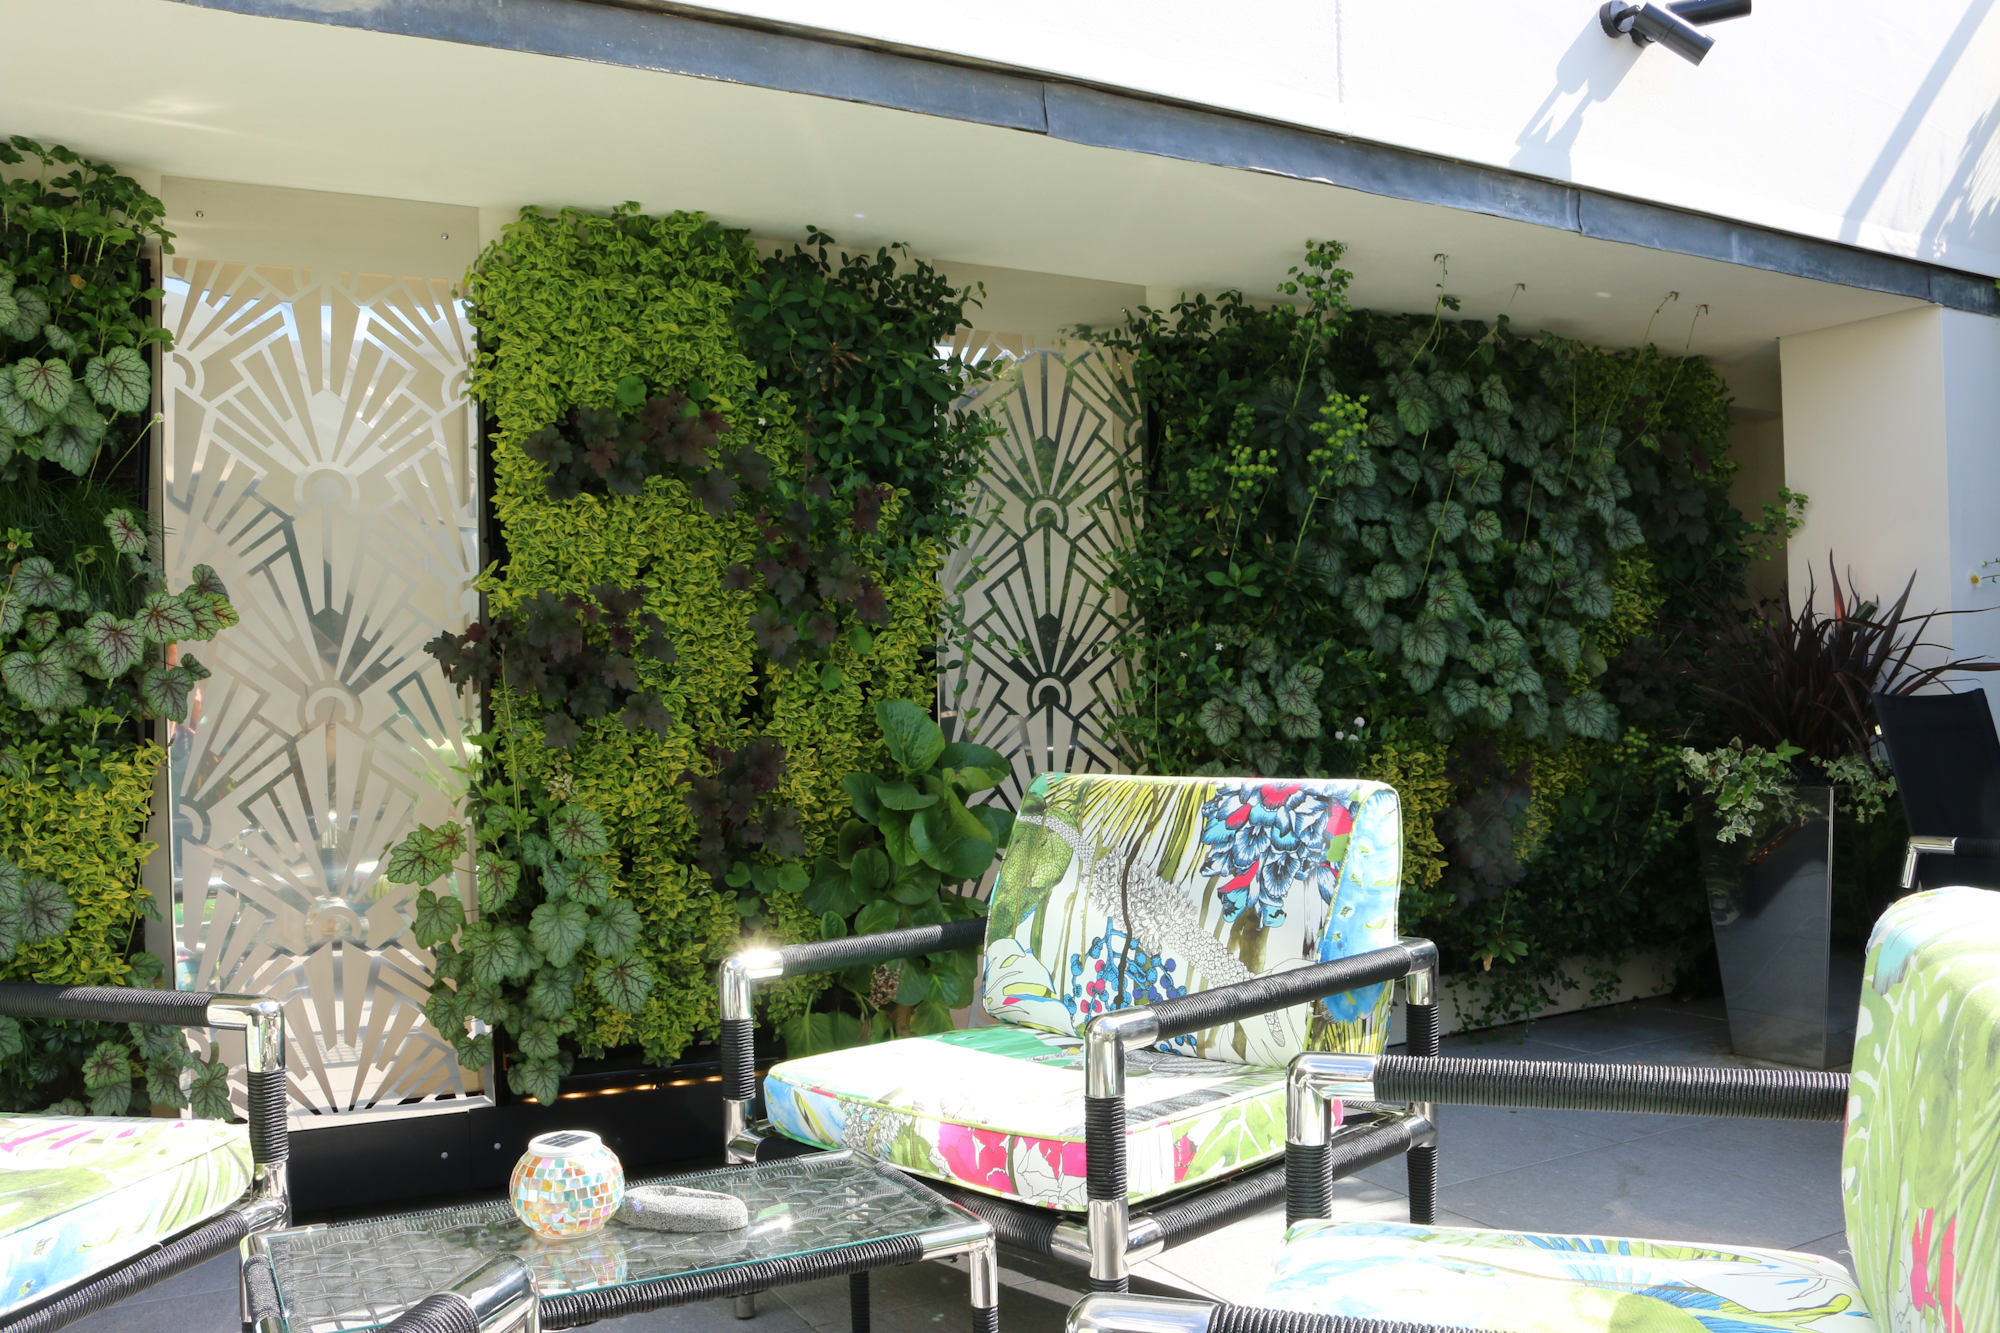 Living Walls In The Outdoor Living Area